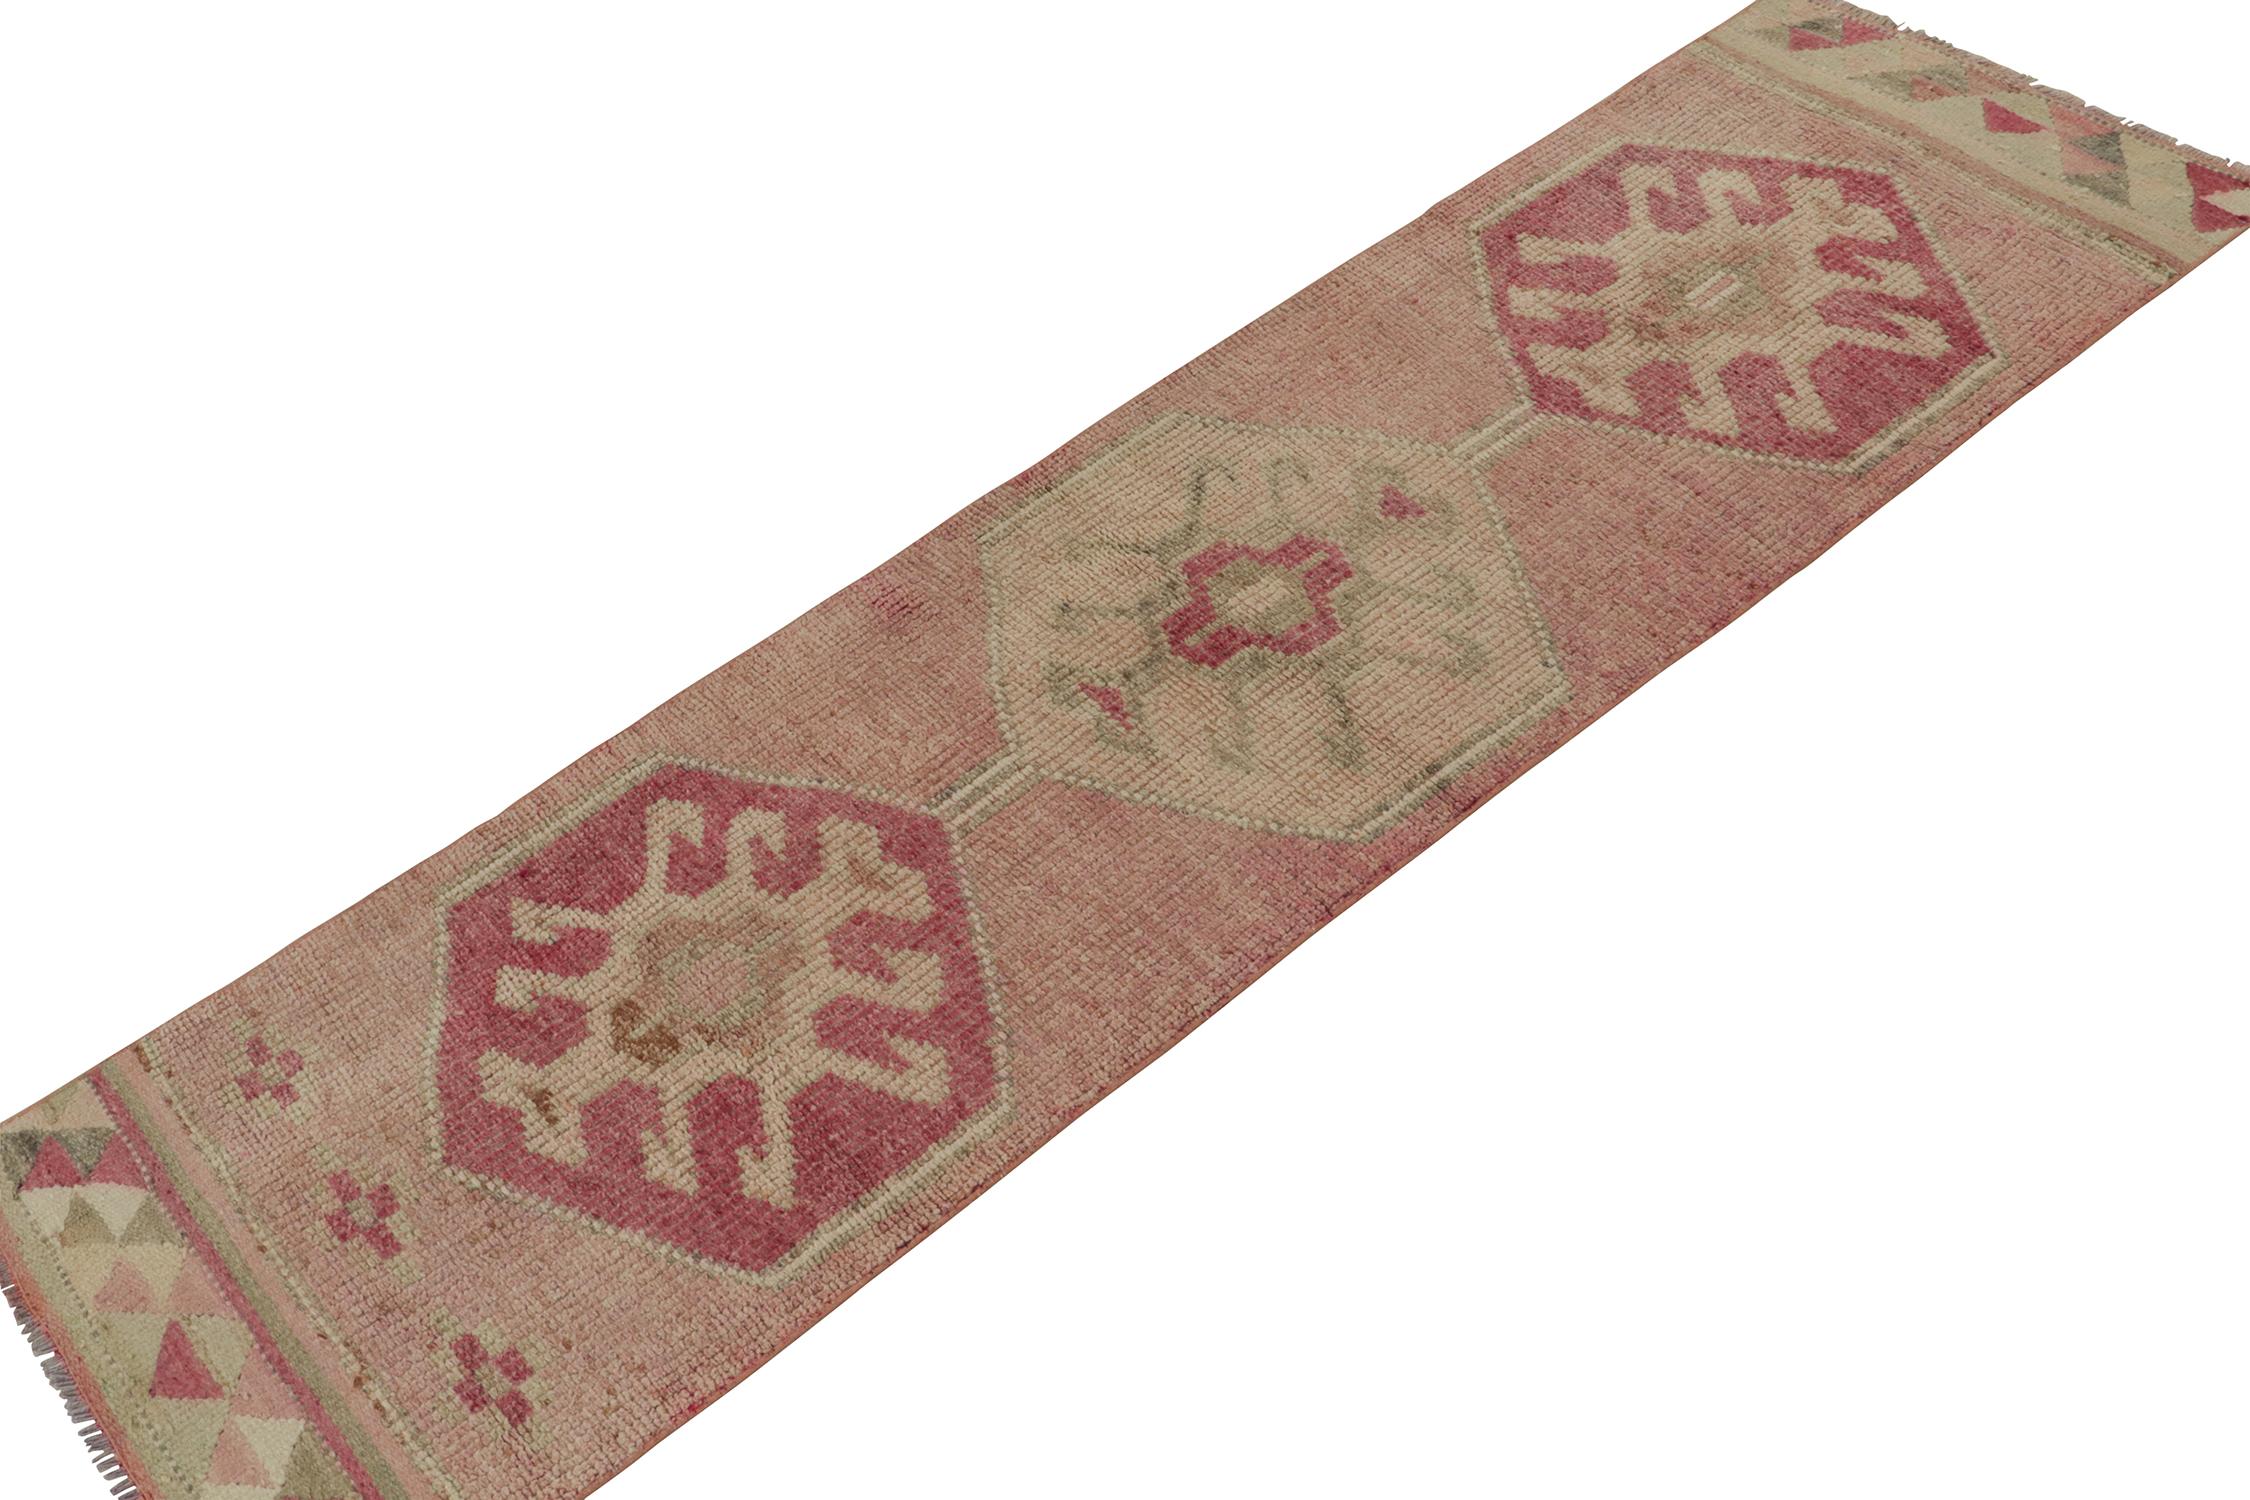 Originating from Turkey circa 1950-1960, a vintage tribal runner from a special curation of pieces newly acquired by R&K Principal Josh Nazmiyal. Hand-knotted in wool, the piece carries tribal medallions with an unusual emphasis on onion pink and